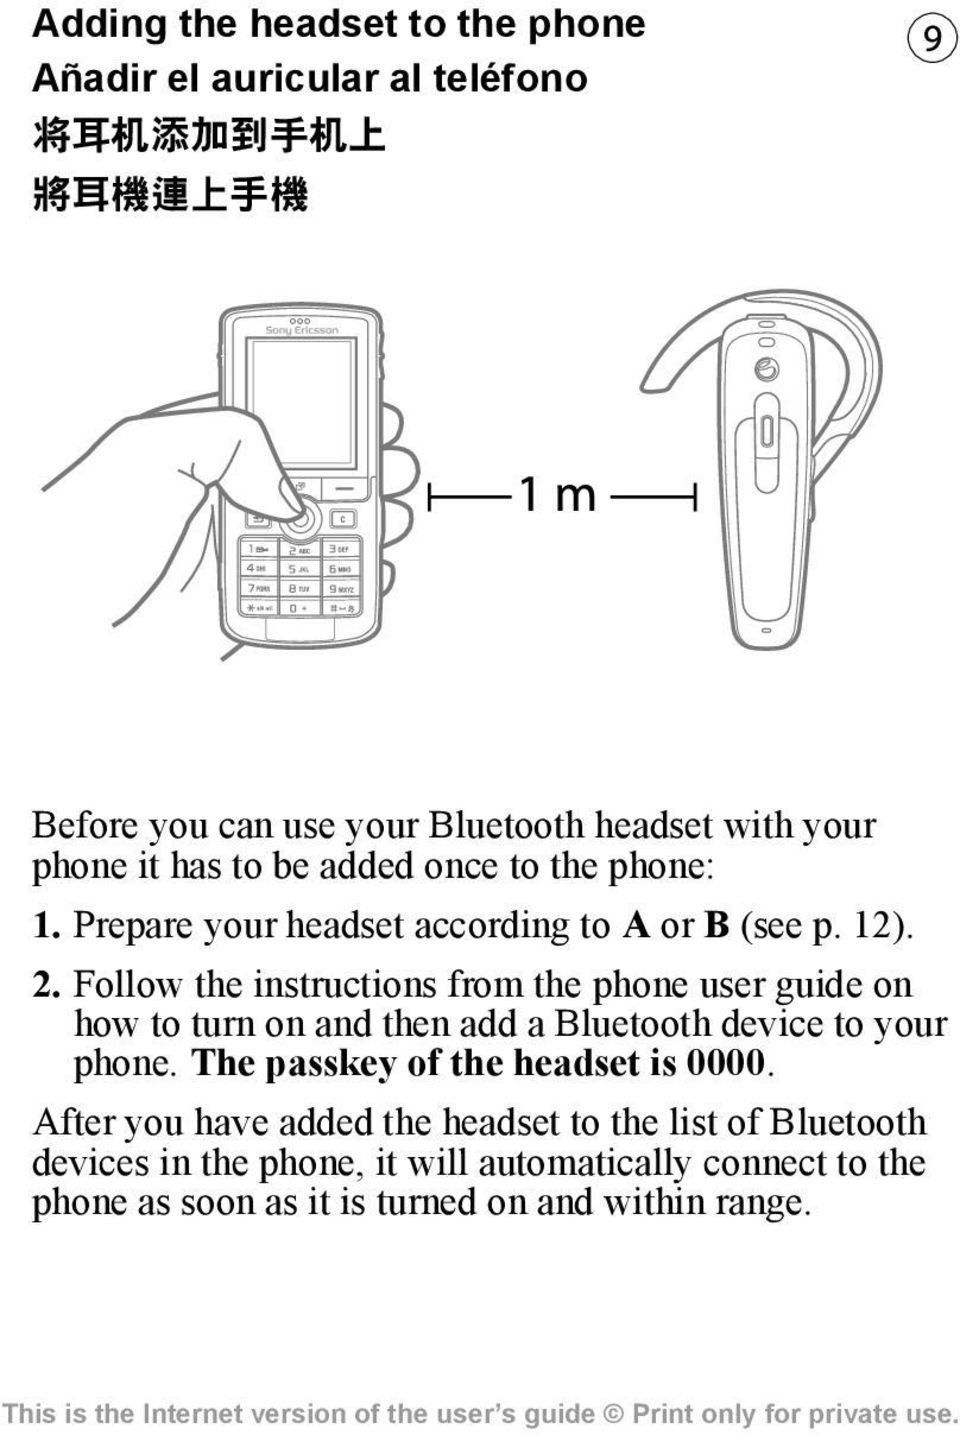 Follow the instructions from the phone user guide on how to turn on and then add a Bluetooth device to your phone.